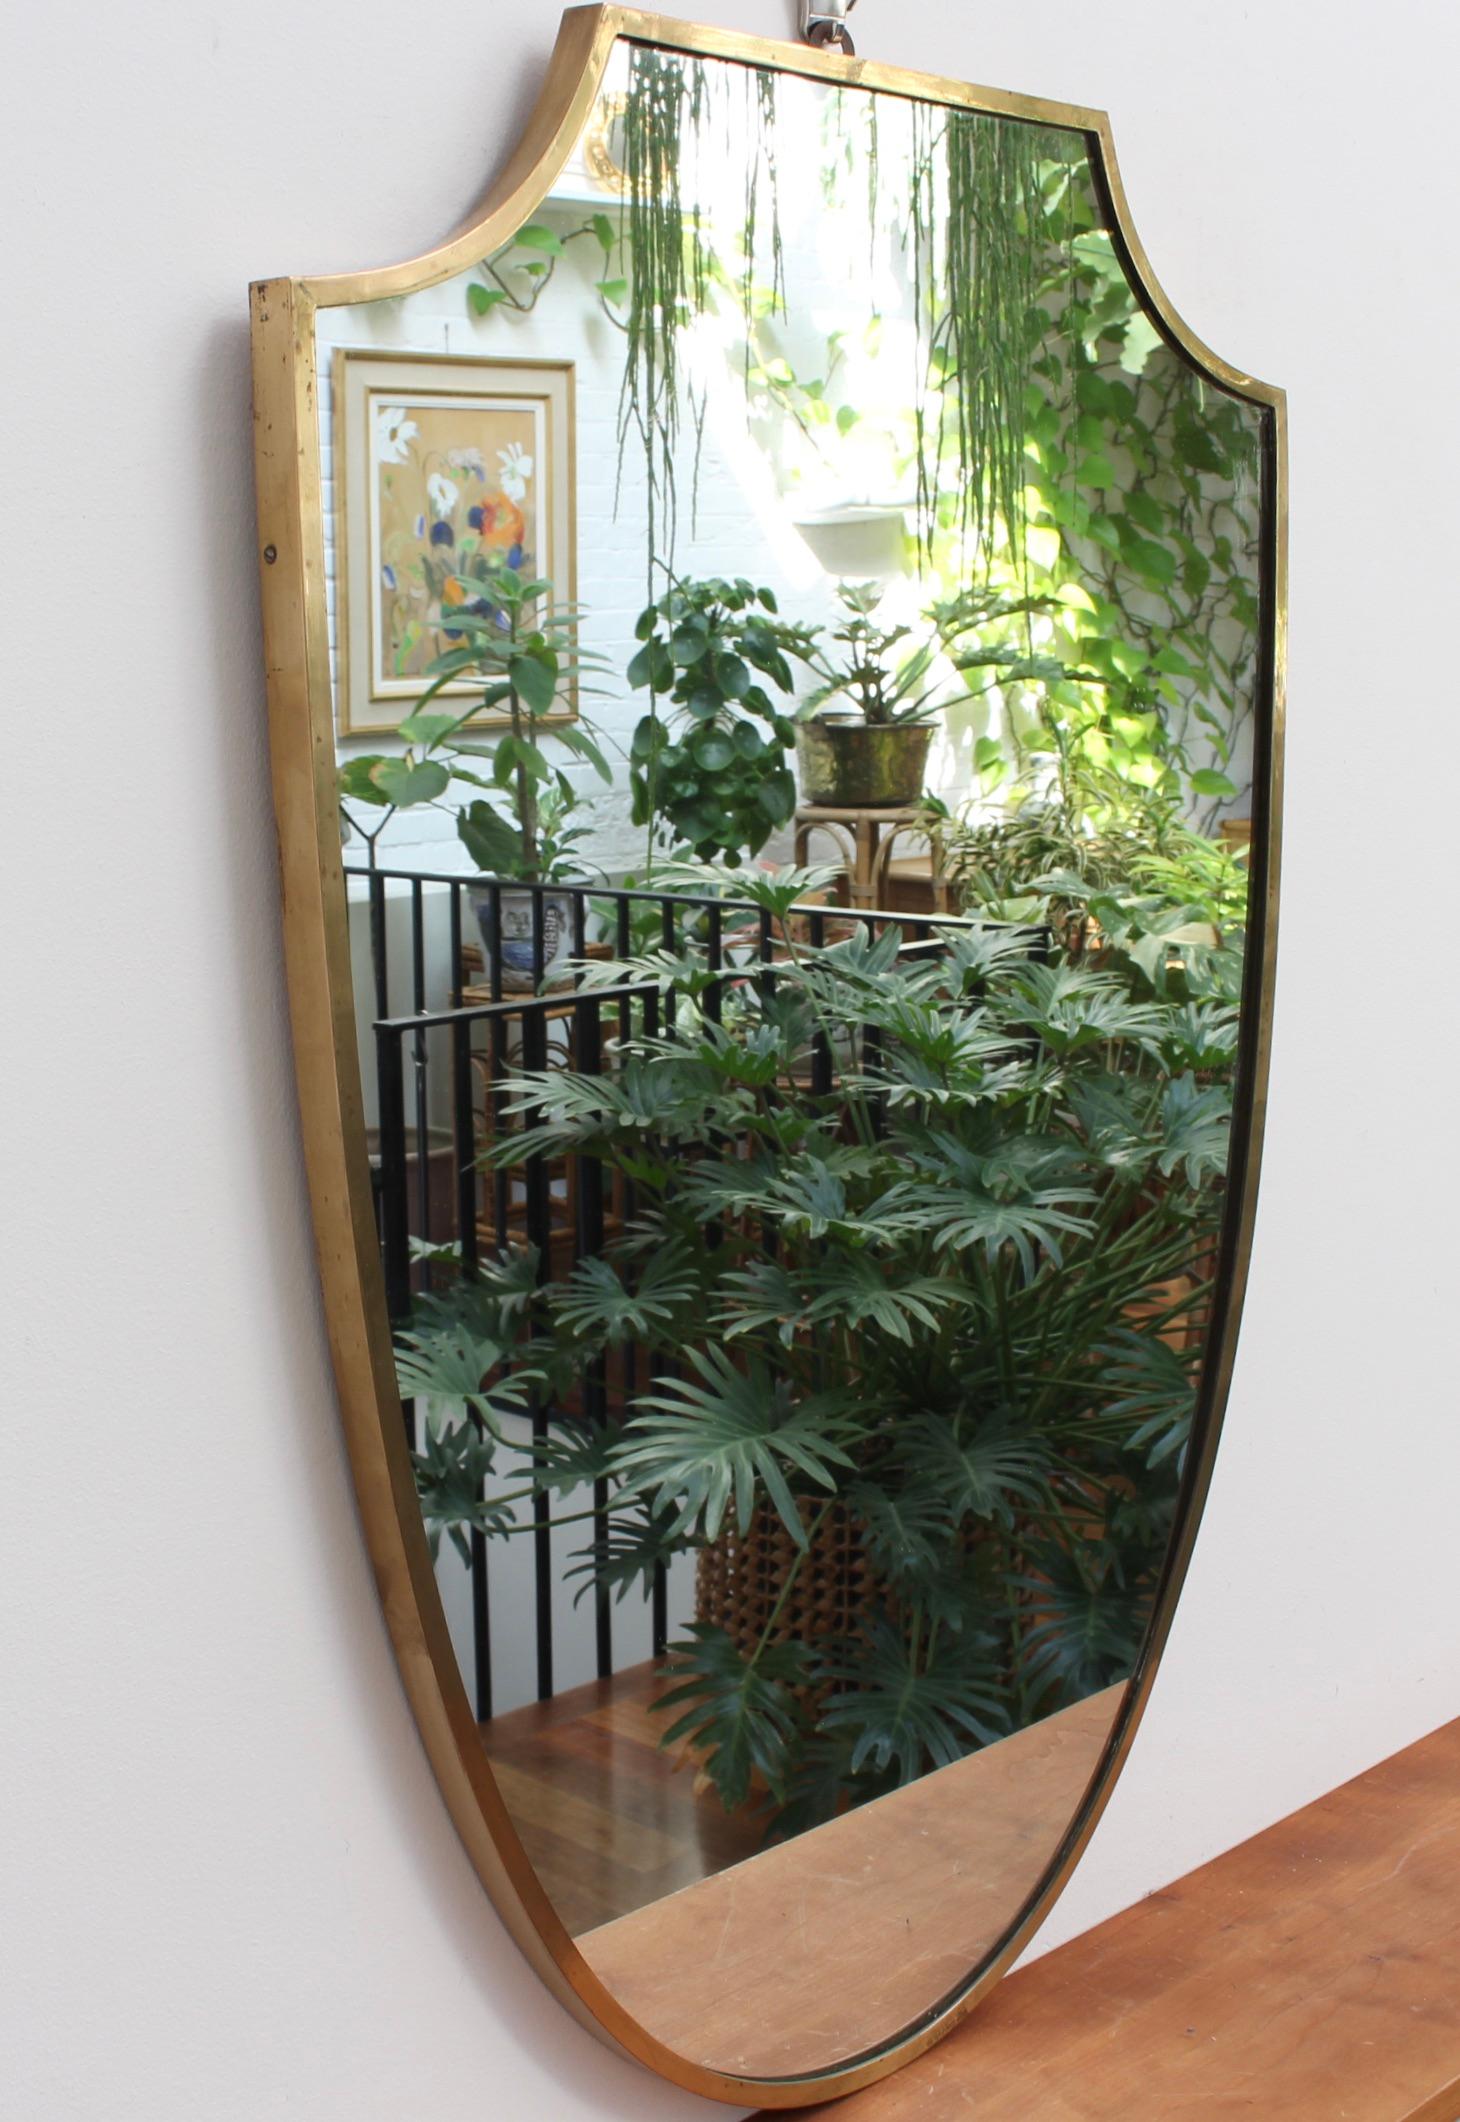 Mid-20th Century Midcentury Italian Crest-Shaped Wall Mirror with Brass Frame, circa 1950s